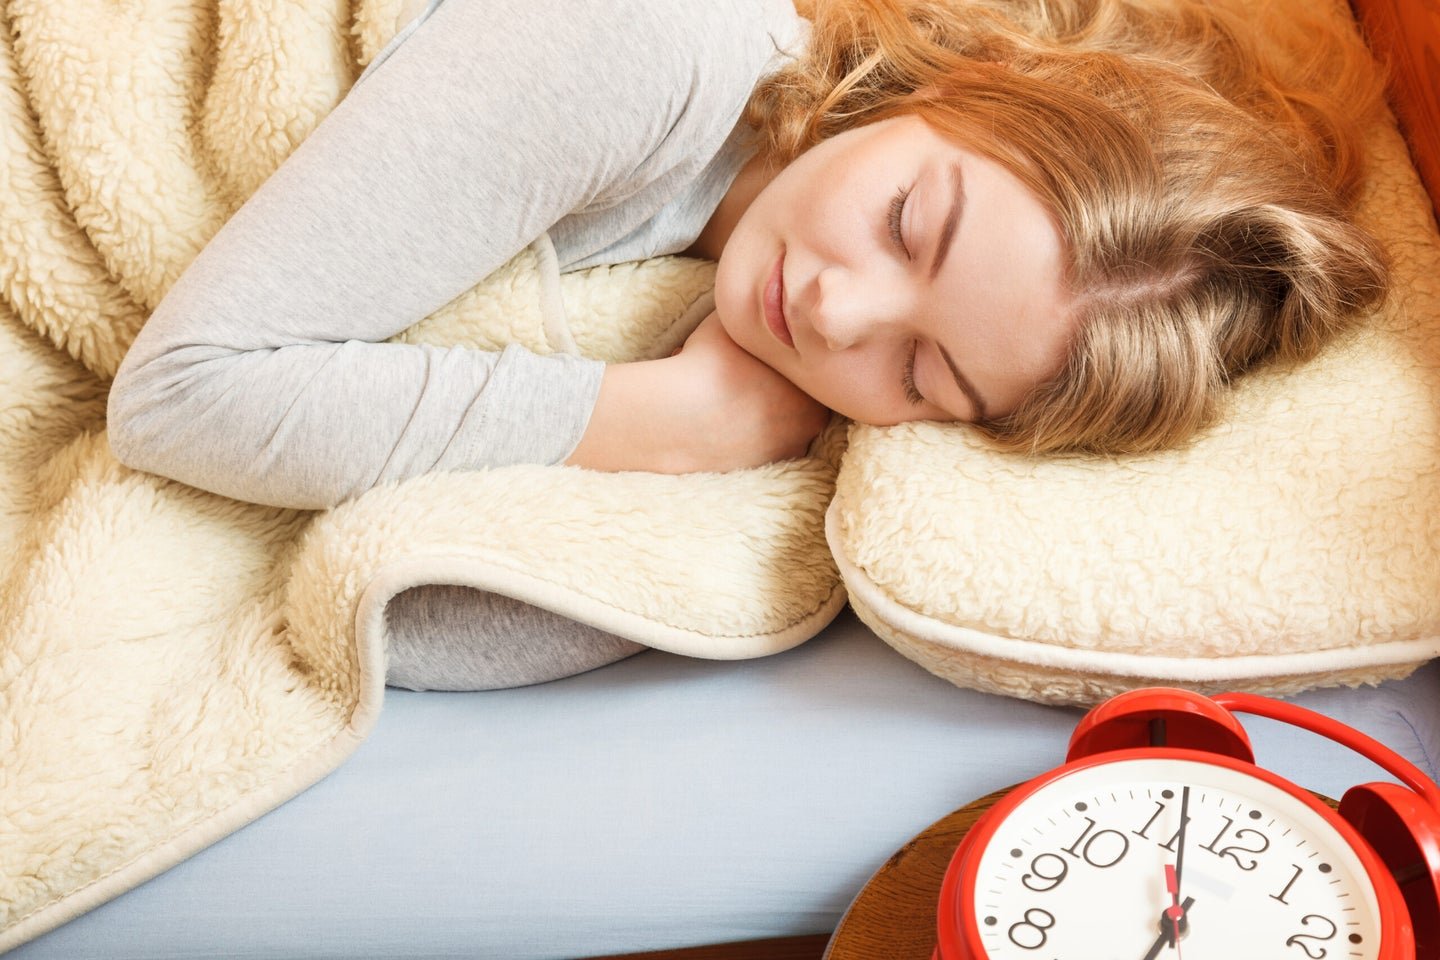 Sleeping in on the weekend might be good for you, but it’s not going to fix all your problems